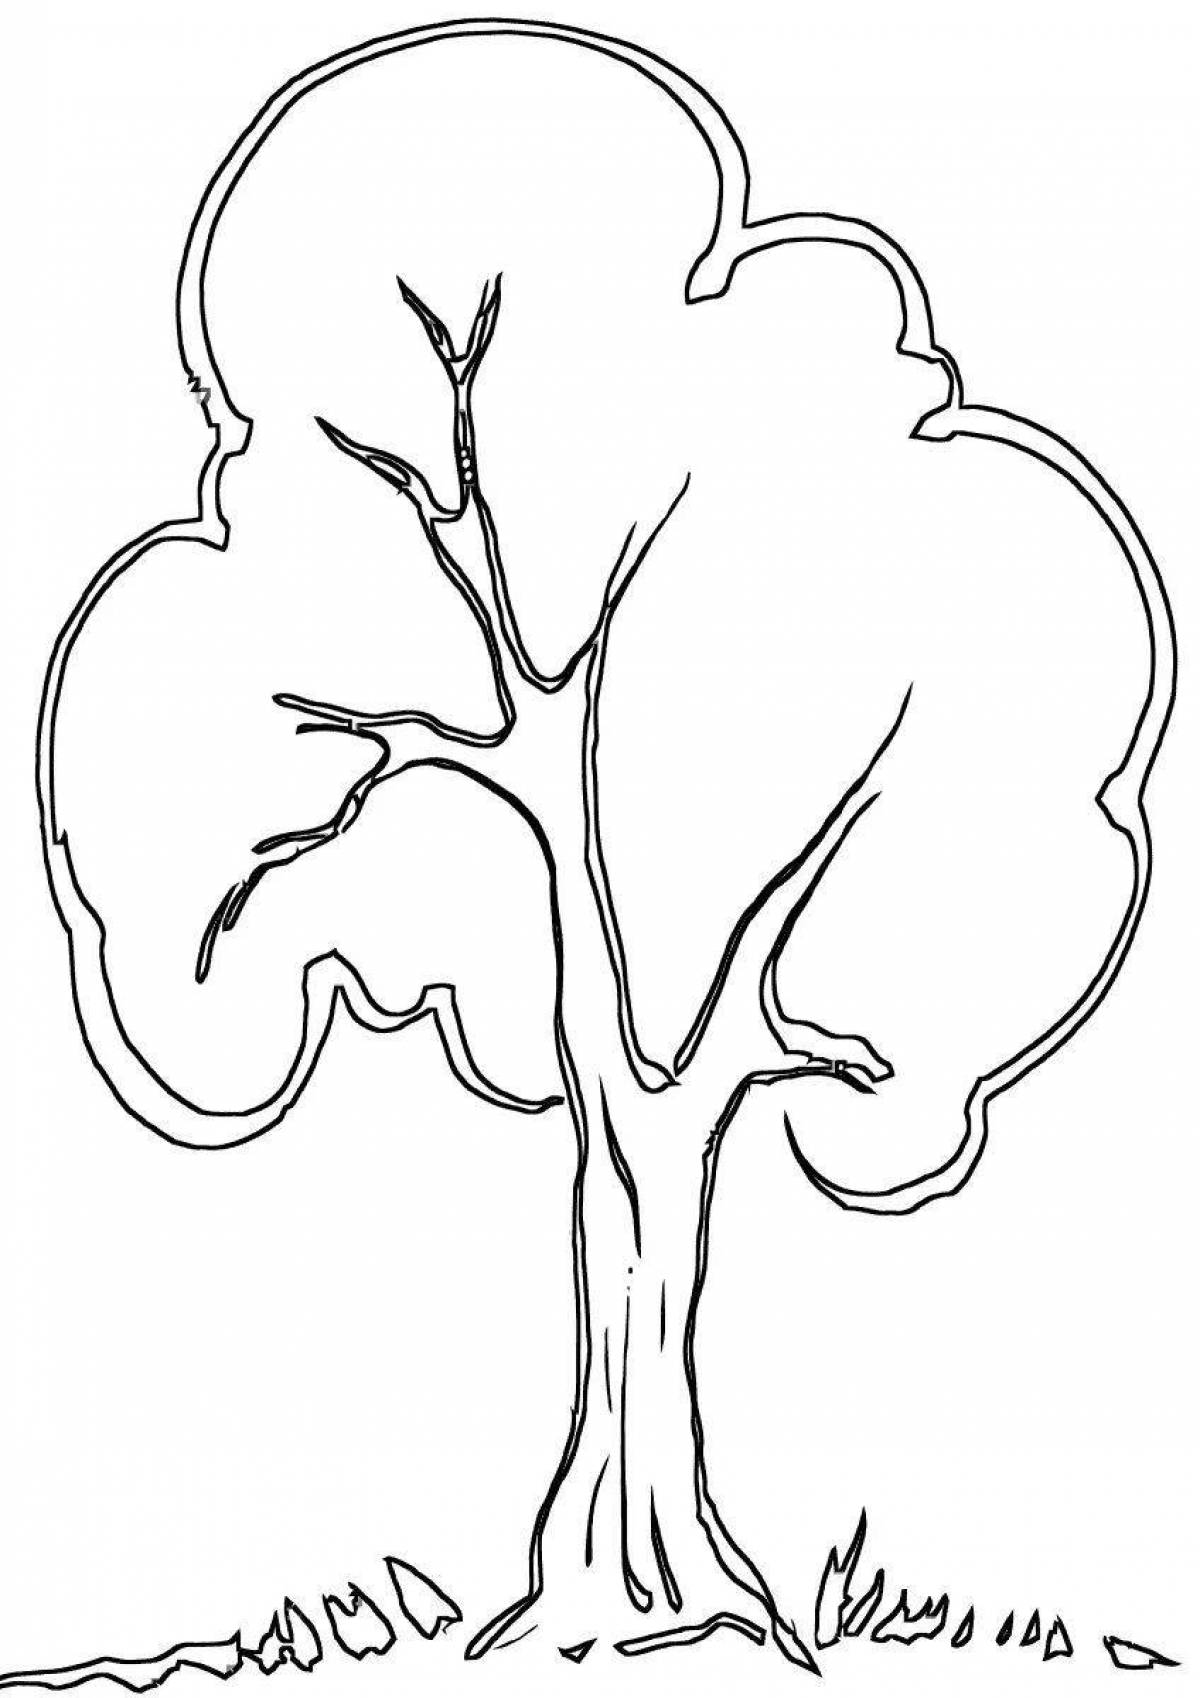 Tree without leaves outline #4